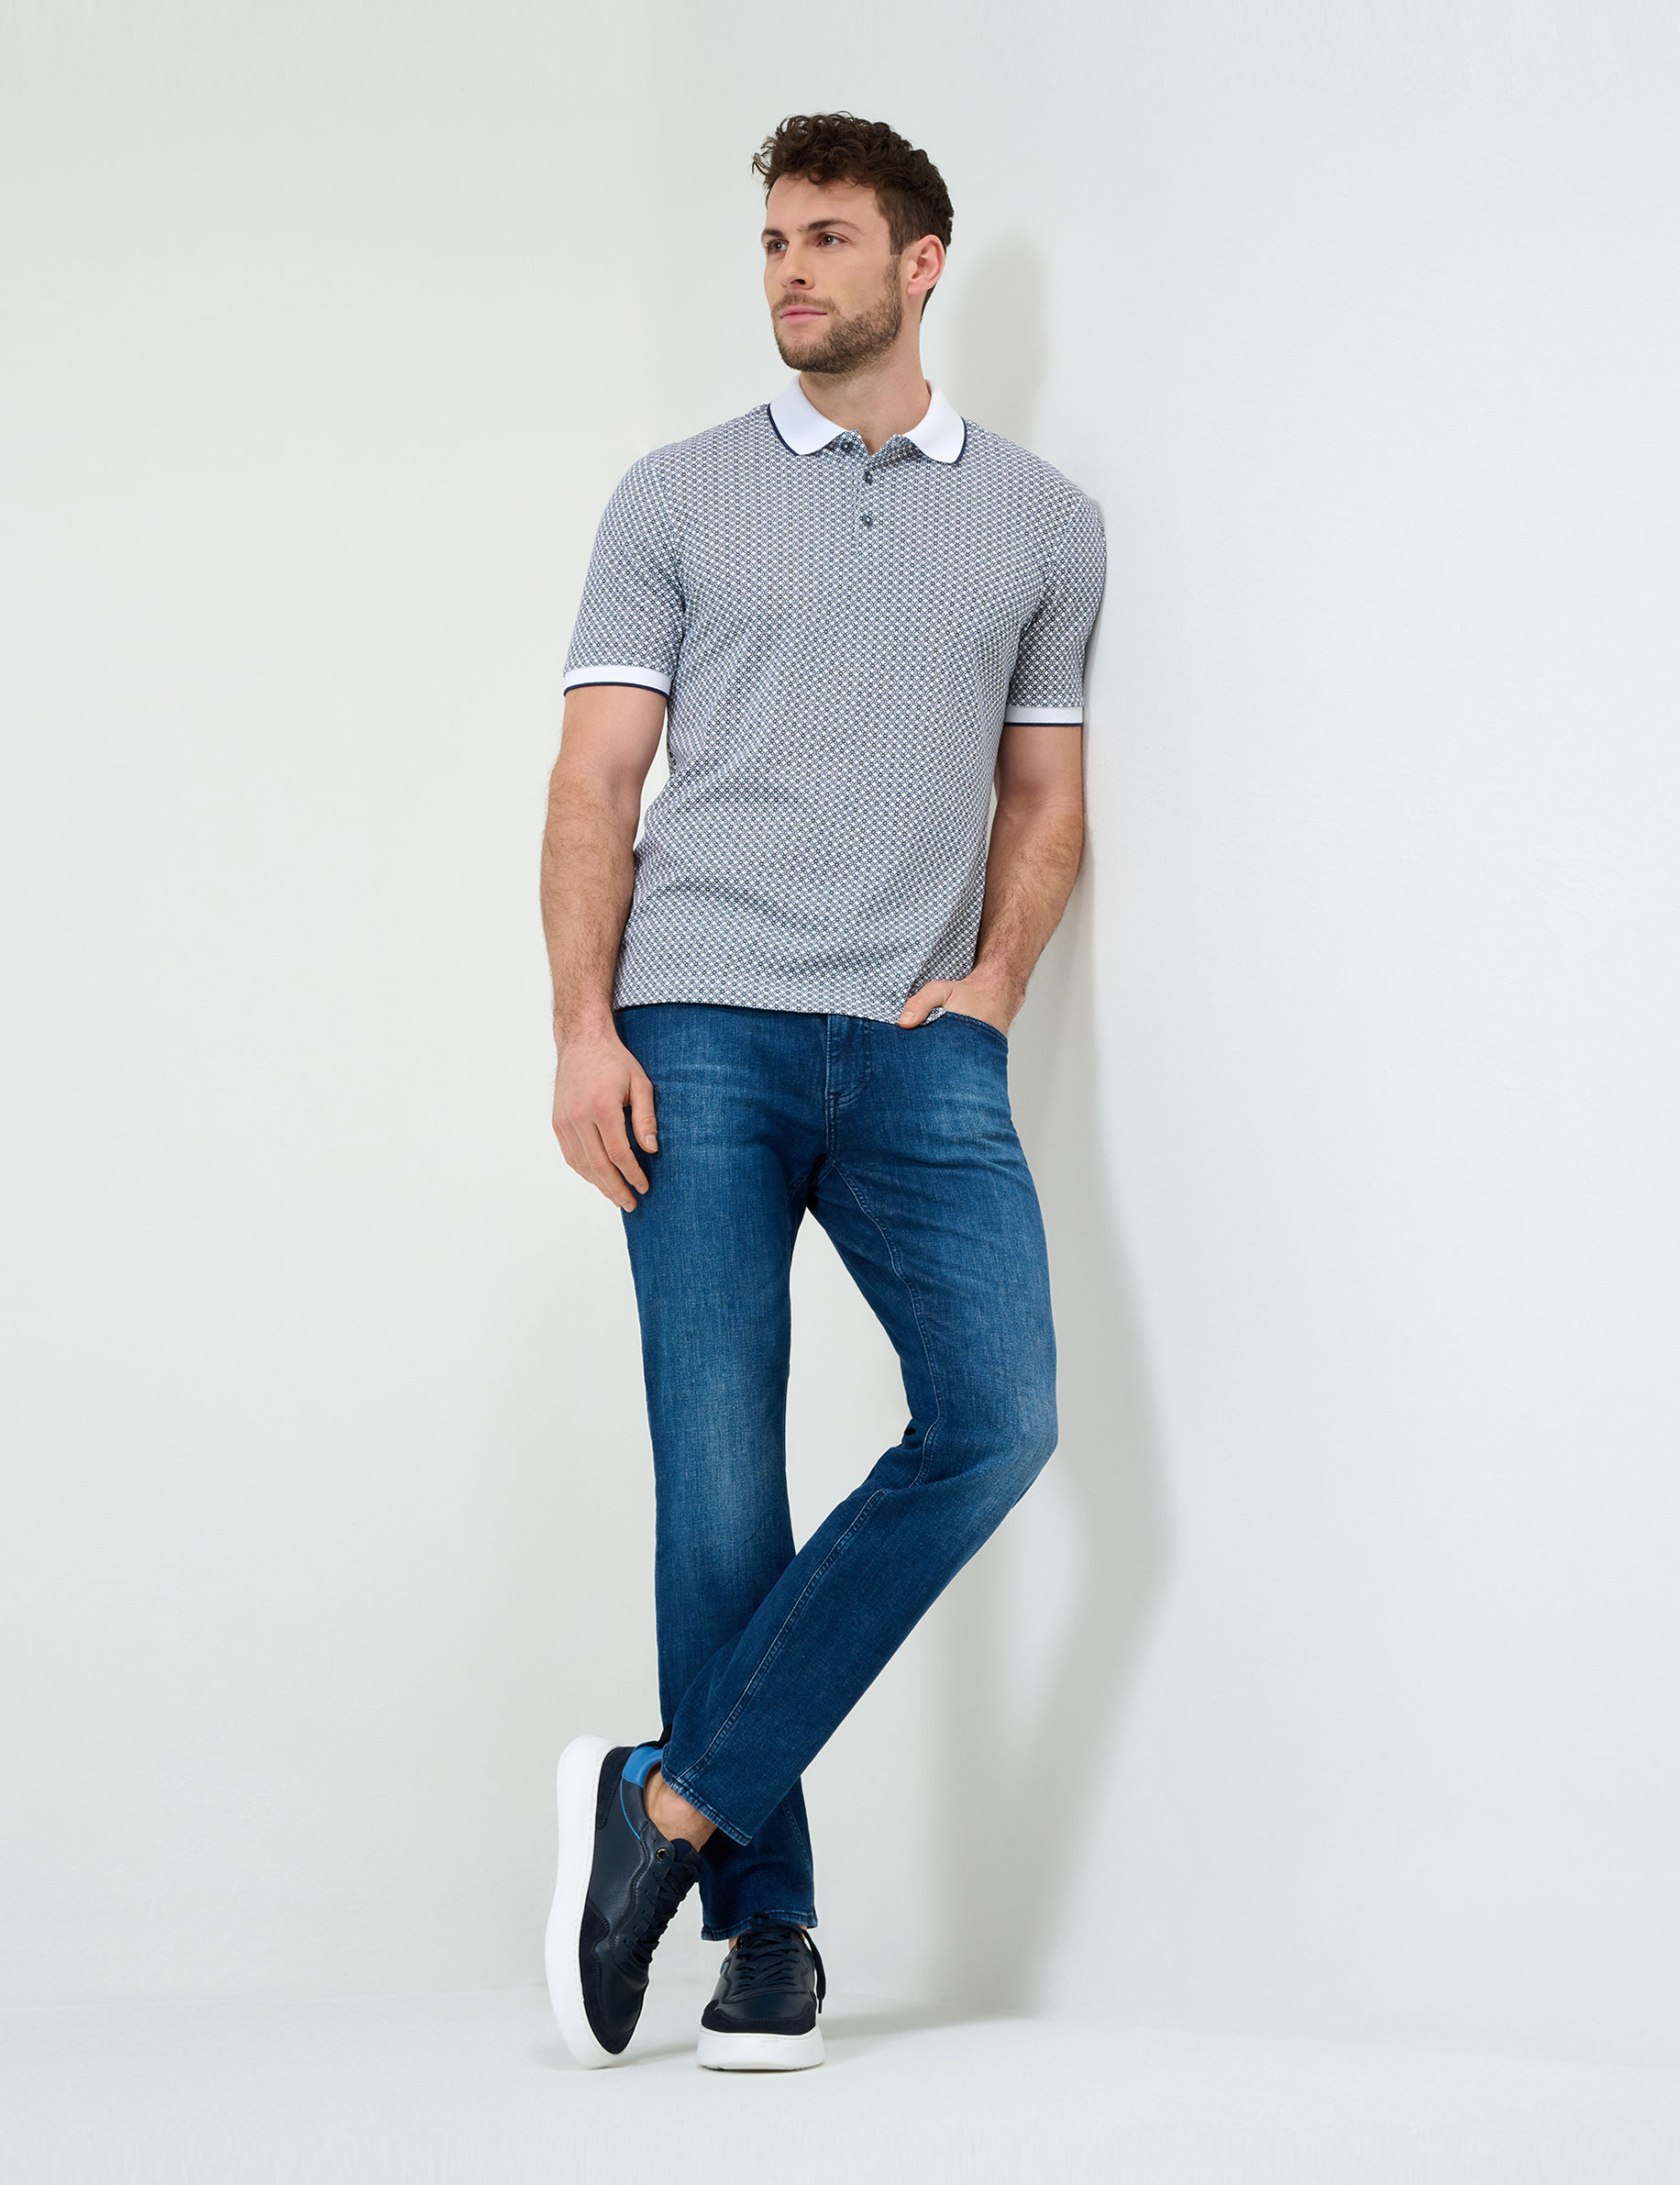 Men Style PERRY white  Model Outfit